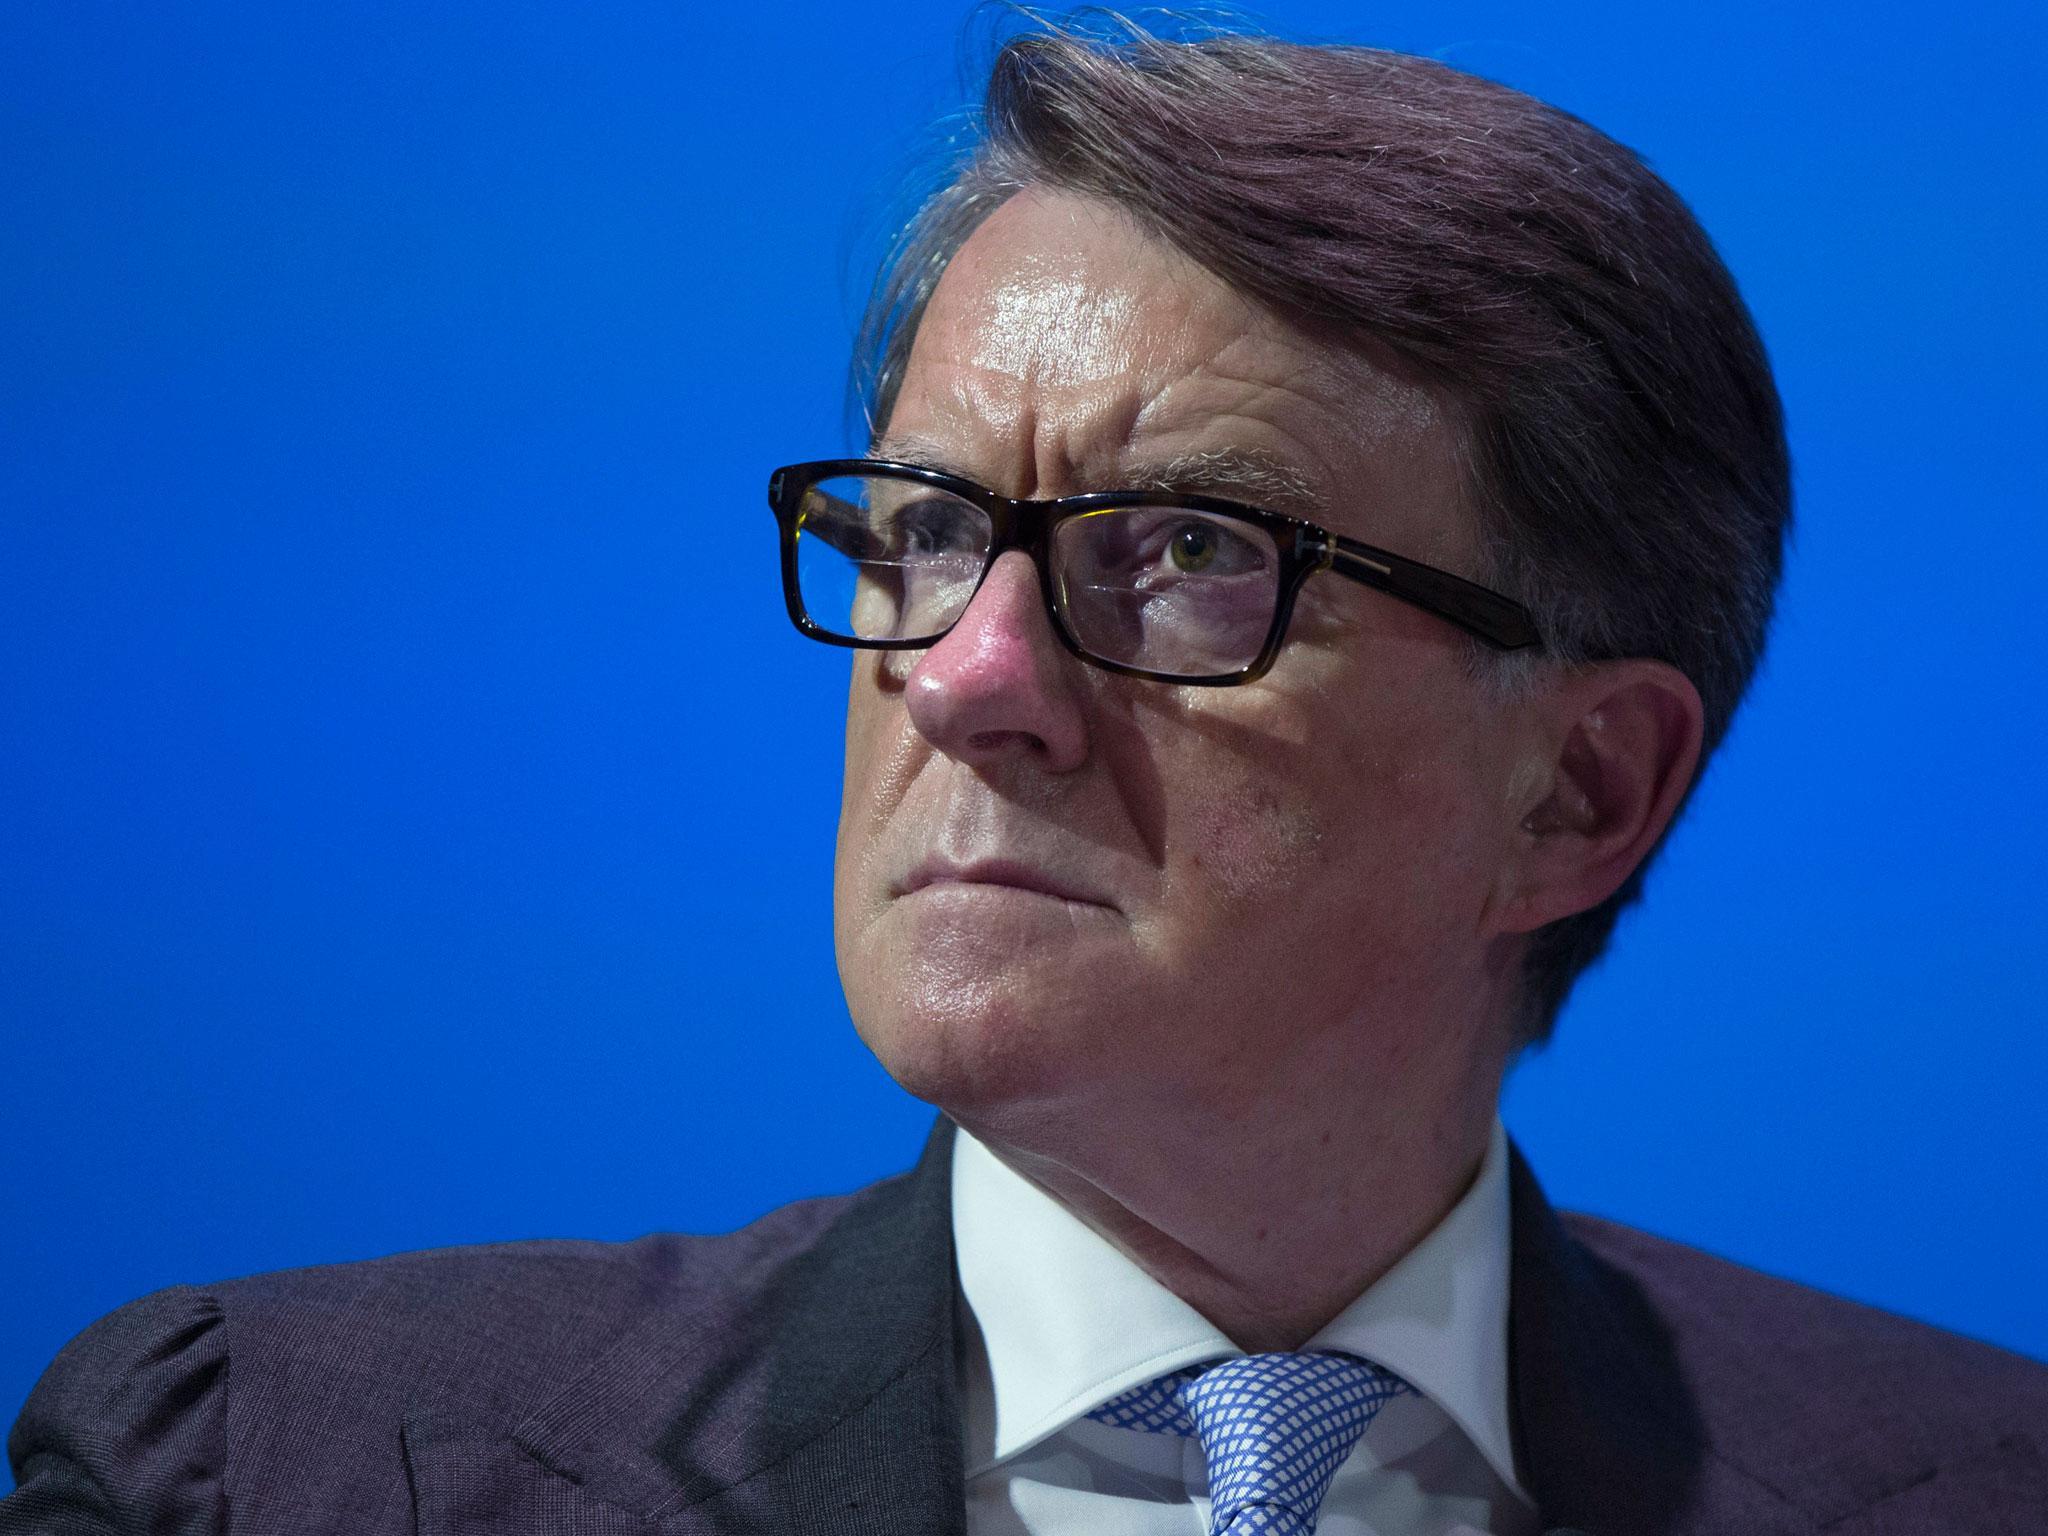 Lord Mandelson said the Prime Minister was ducking 'difficult choices' about Brexit